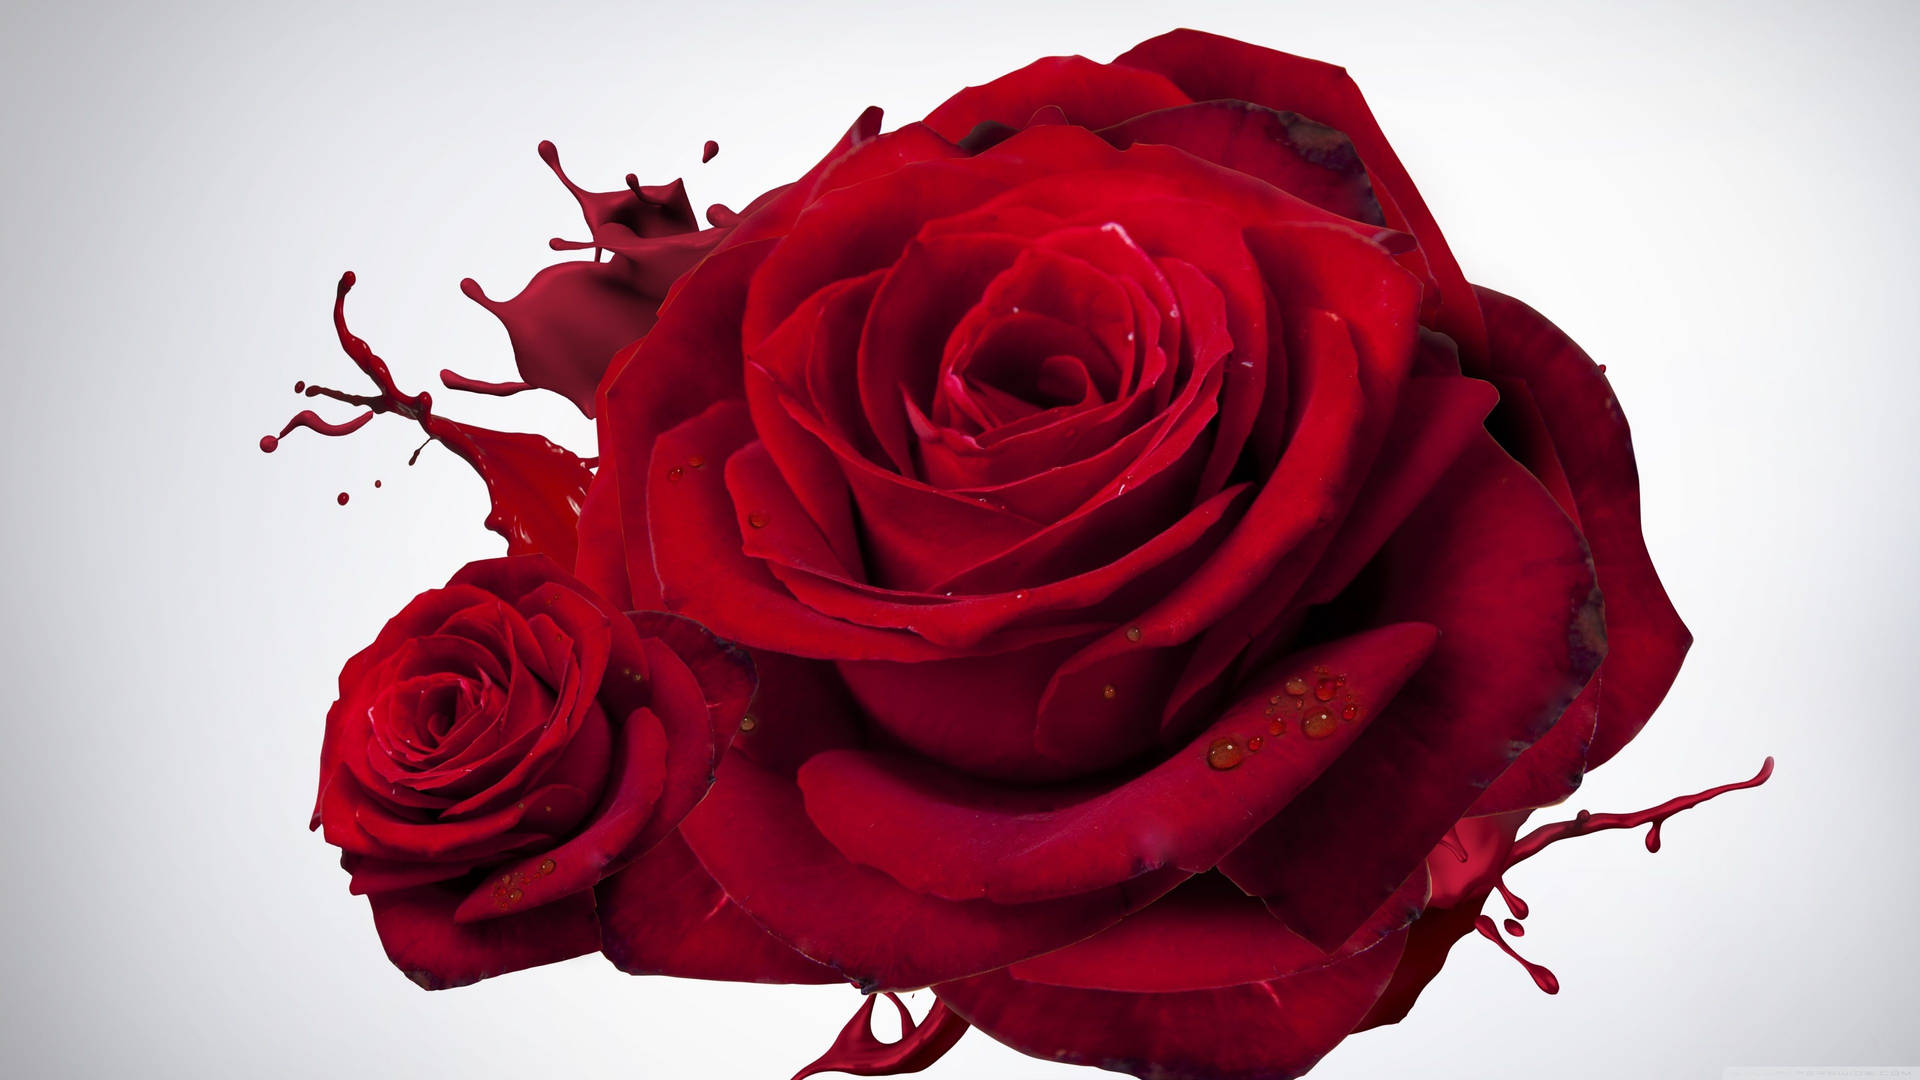 Premium AI Image | Red roses wallpapers for iphone and android. red roses  wallpaper, red roses wallpaper, red roses, red roses, red roses, red roses,  red roses, red roses,